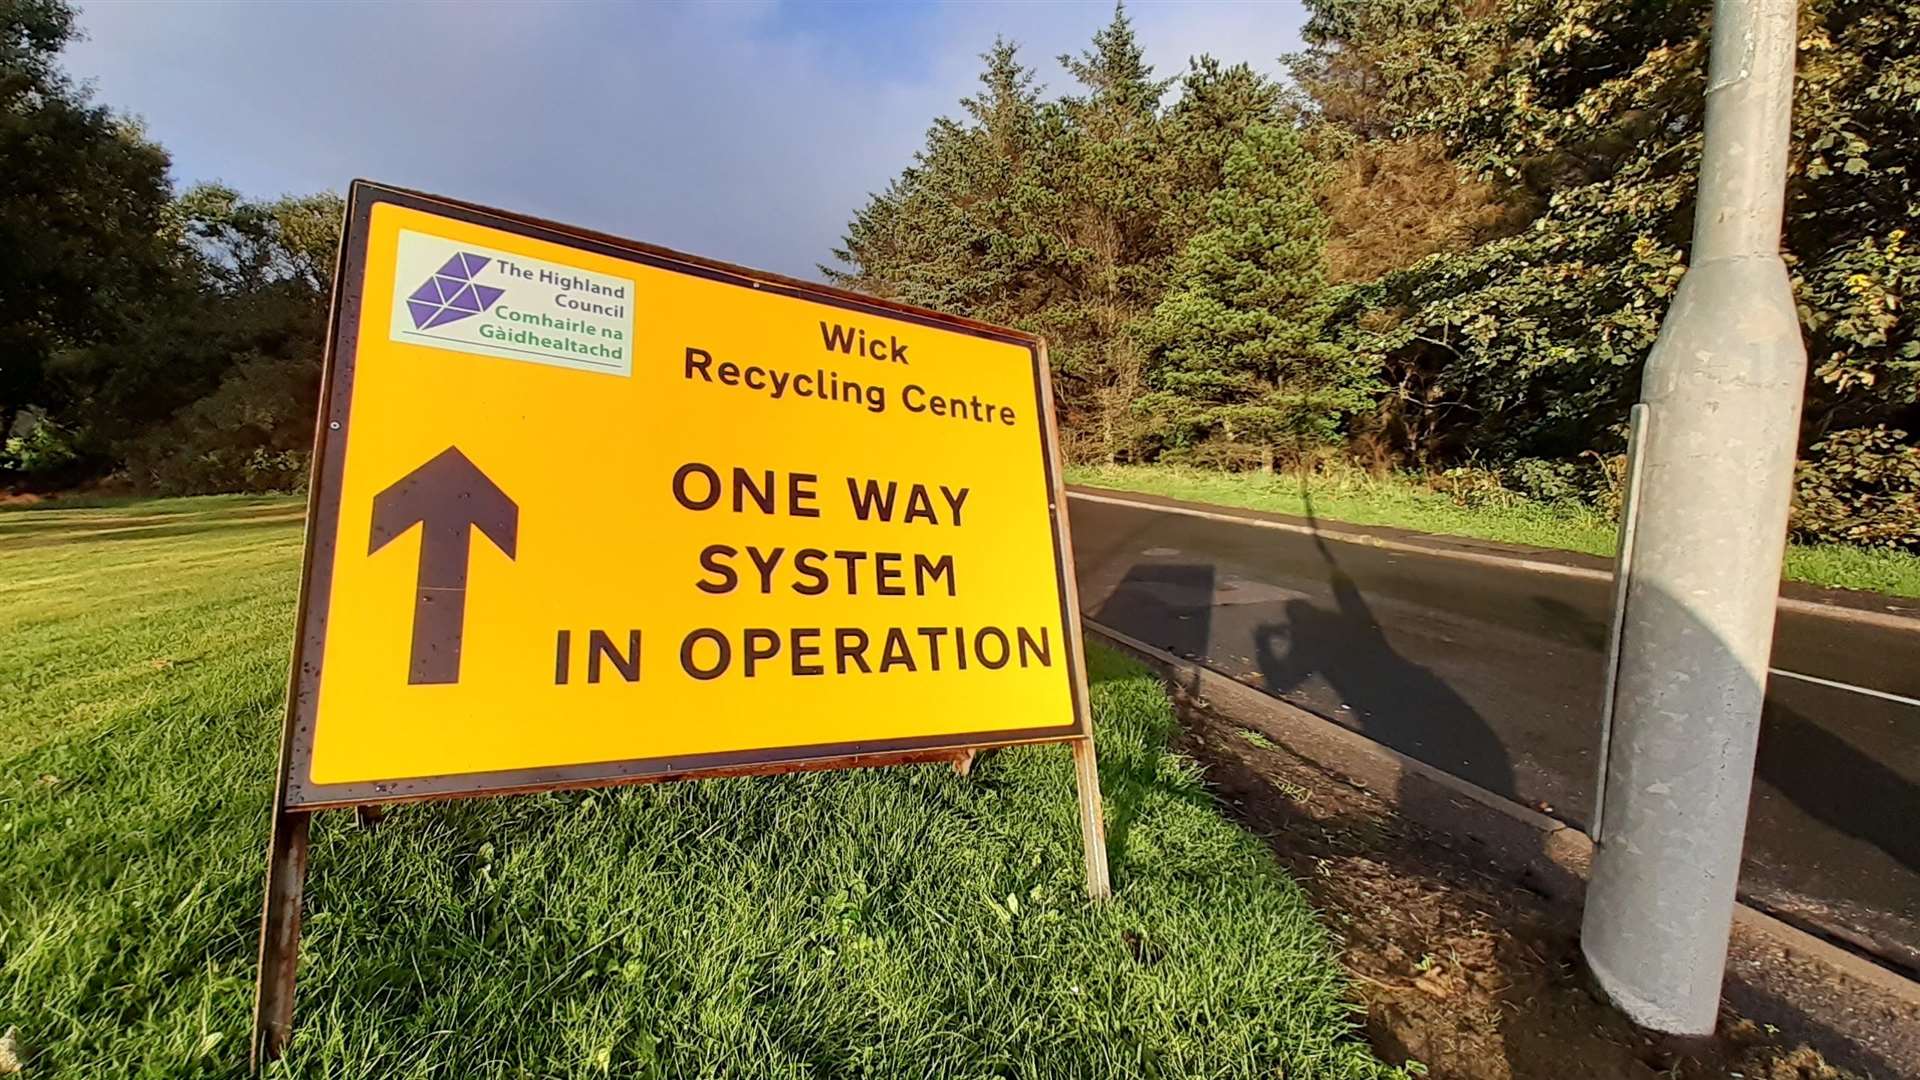 Local recycling centres will be open at the weekend, although restrictions on the range of materials will continue.